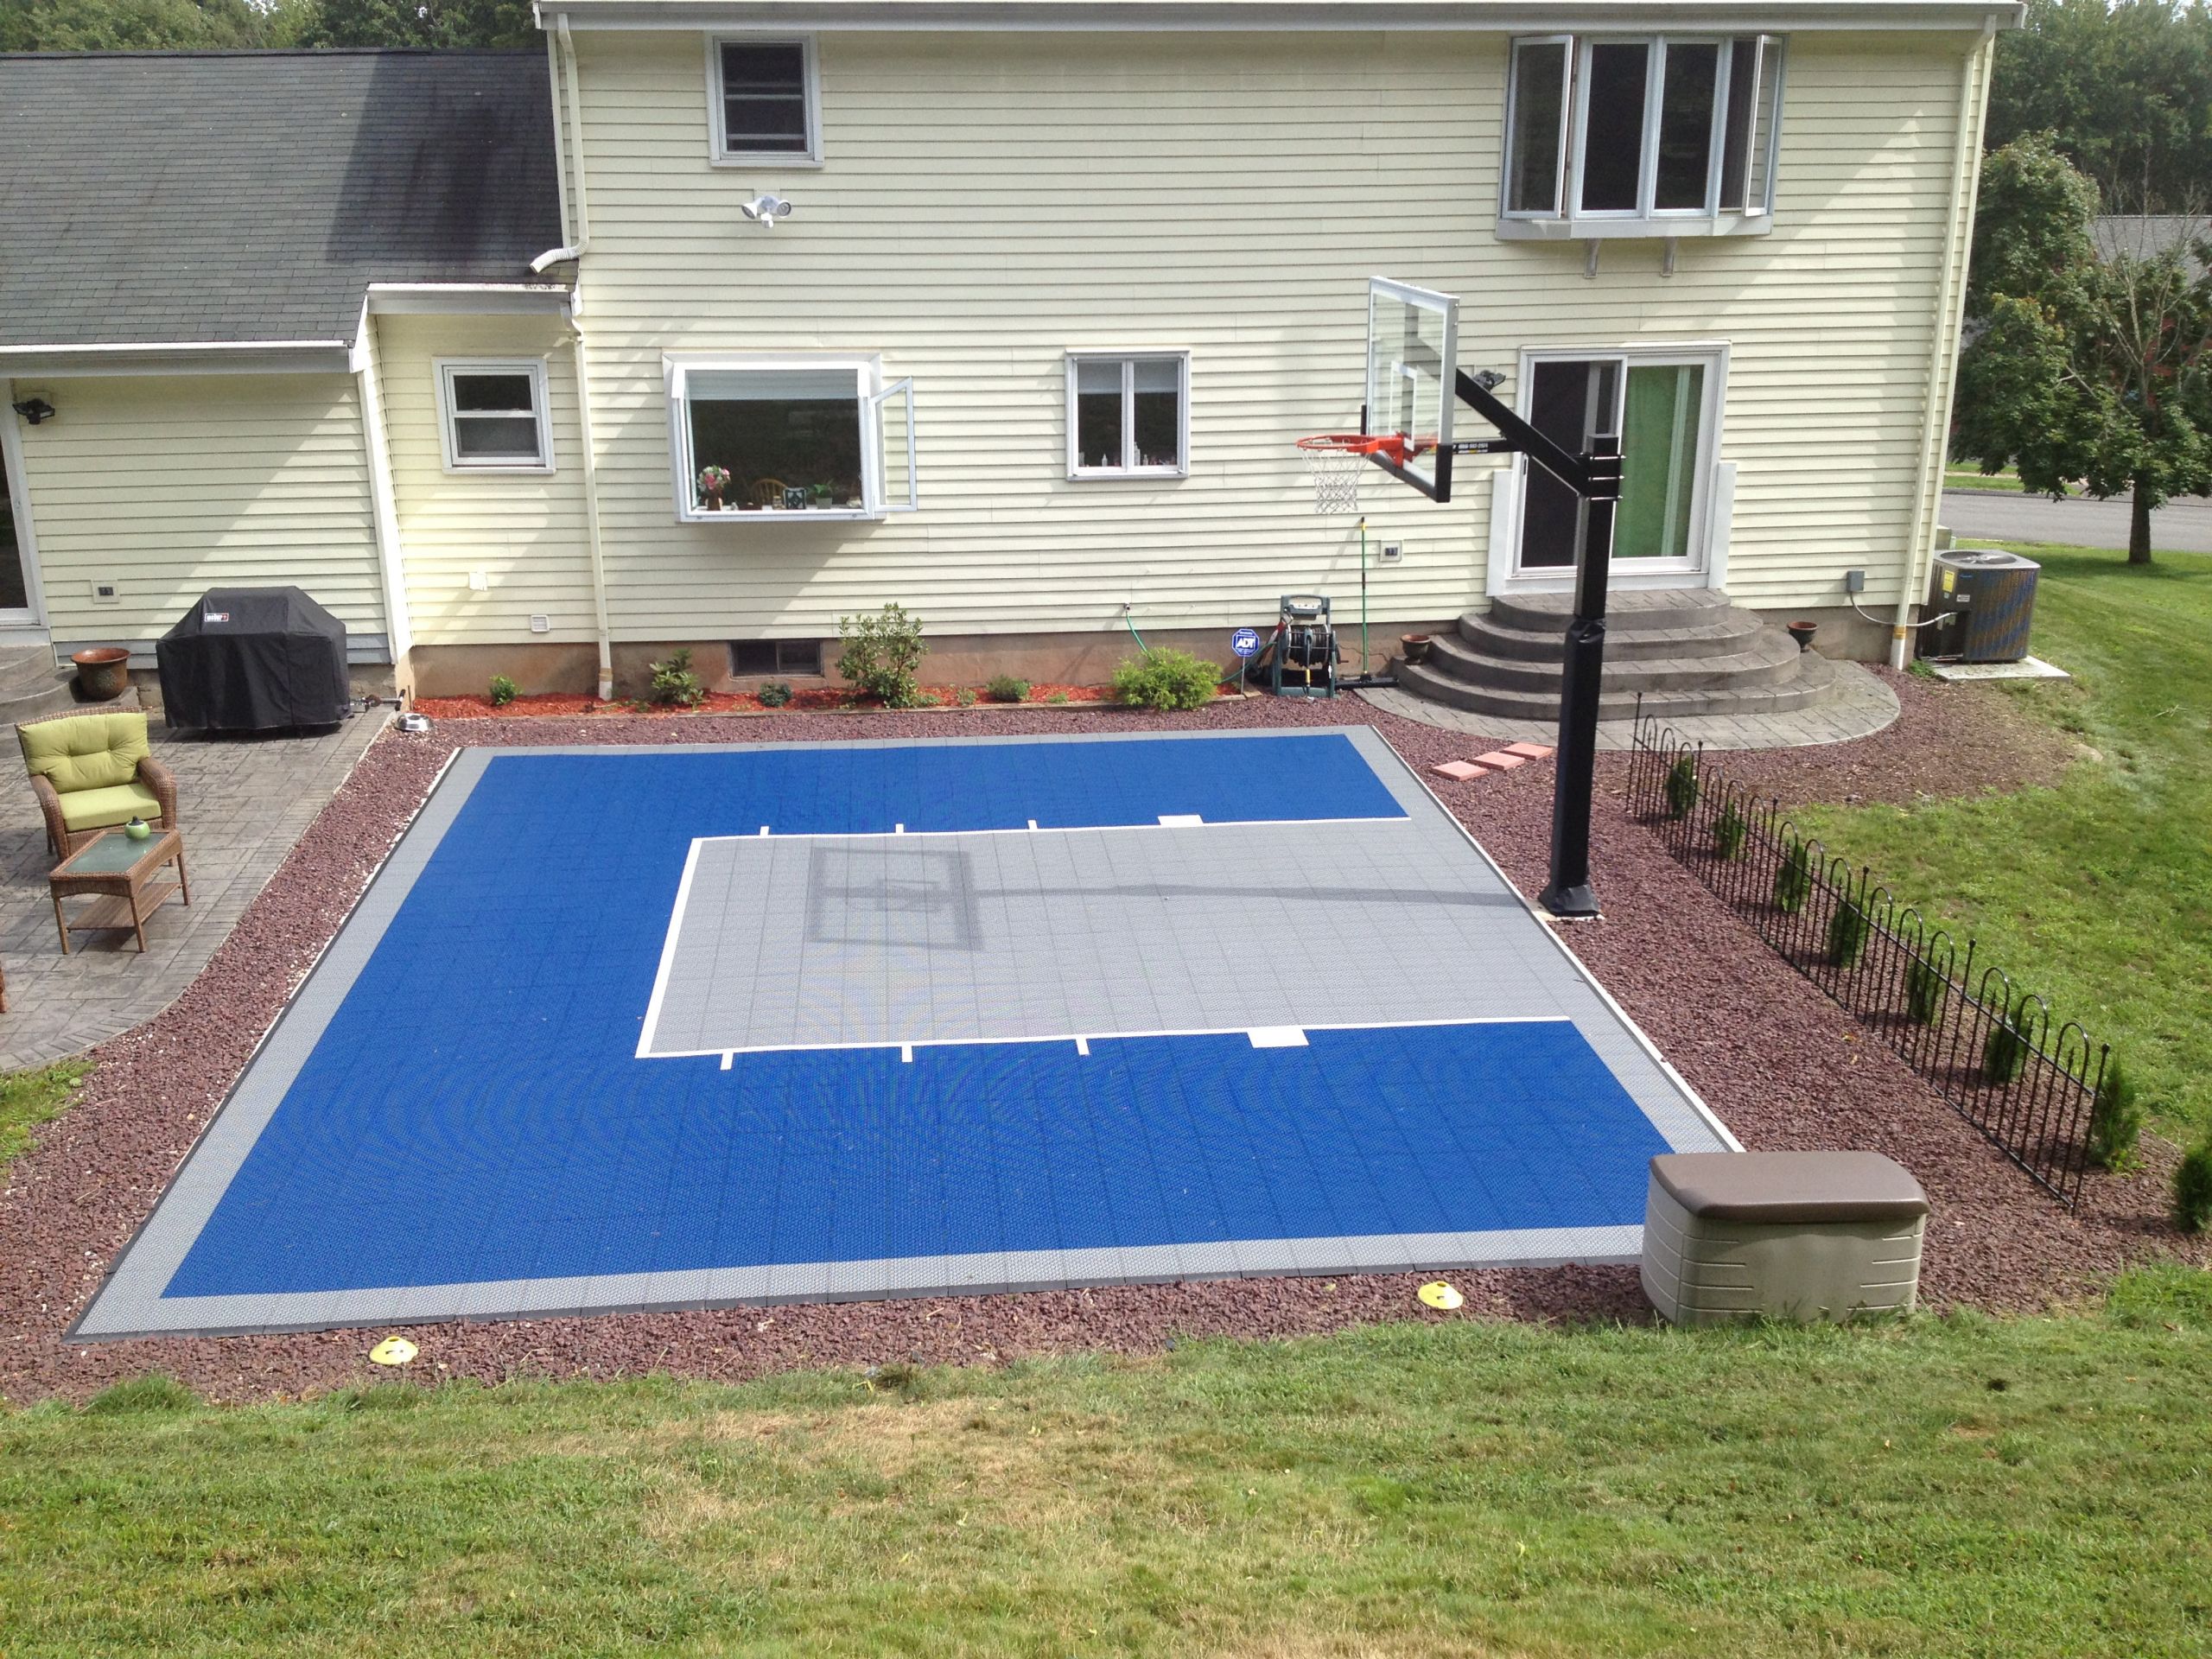 Basketball Court In Backyard
 The Hercules Platinum is the perfect fit for this clear